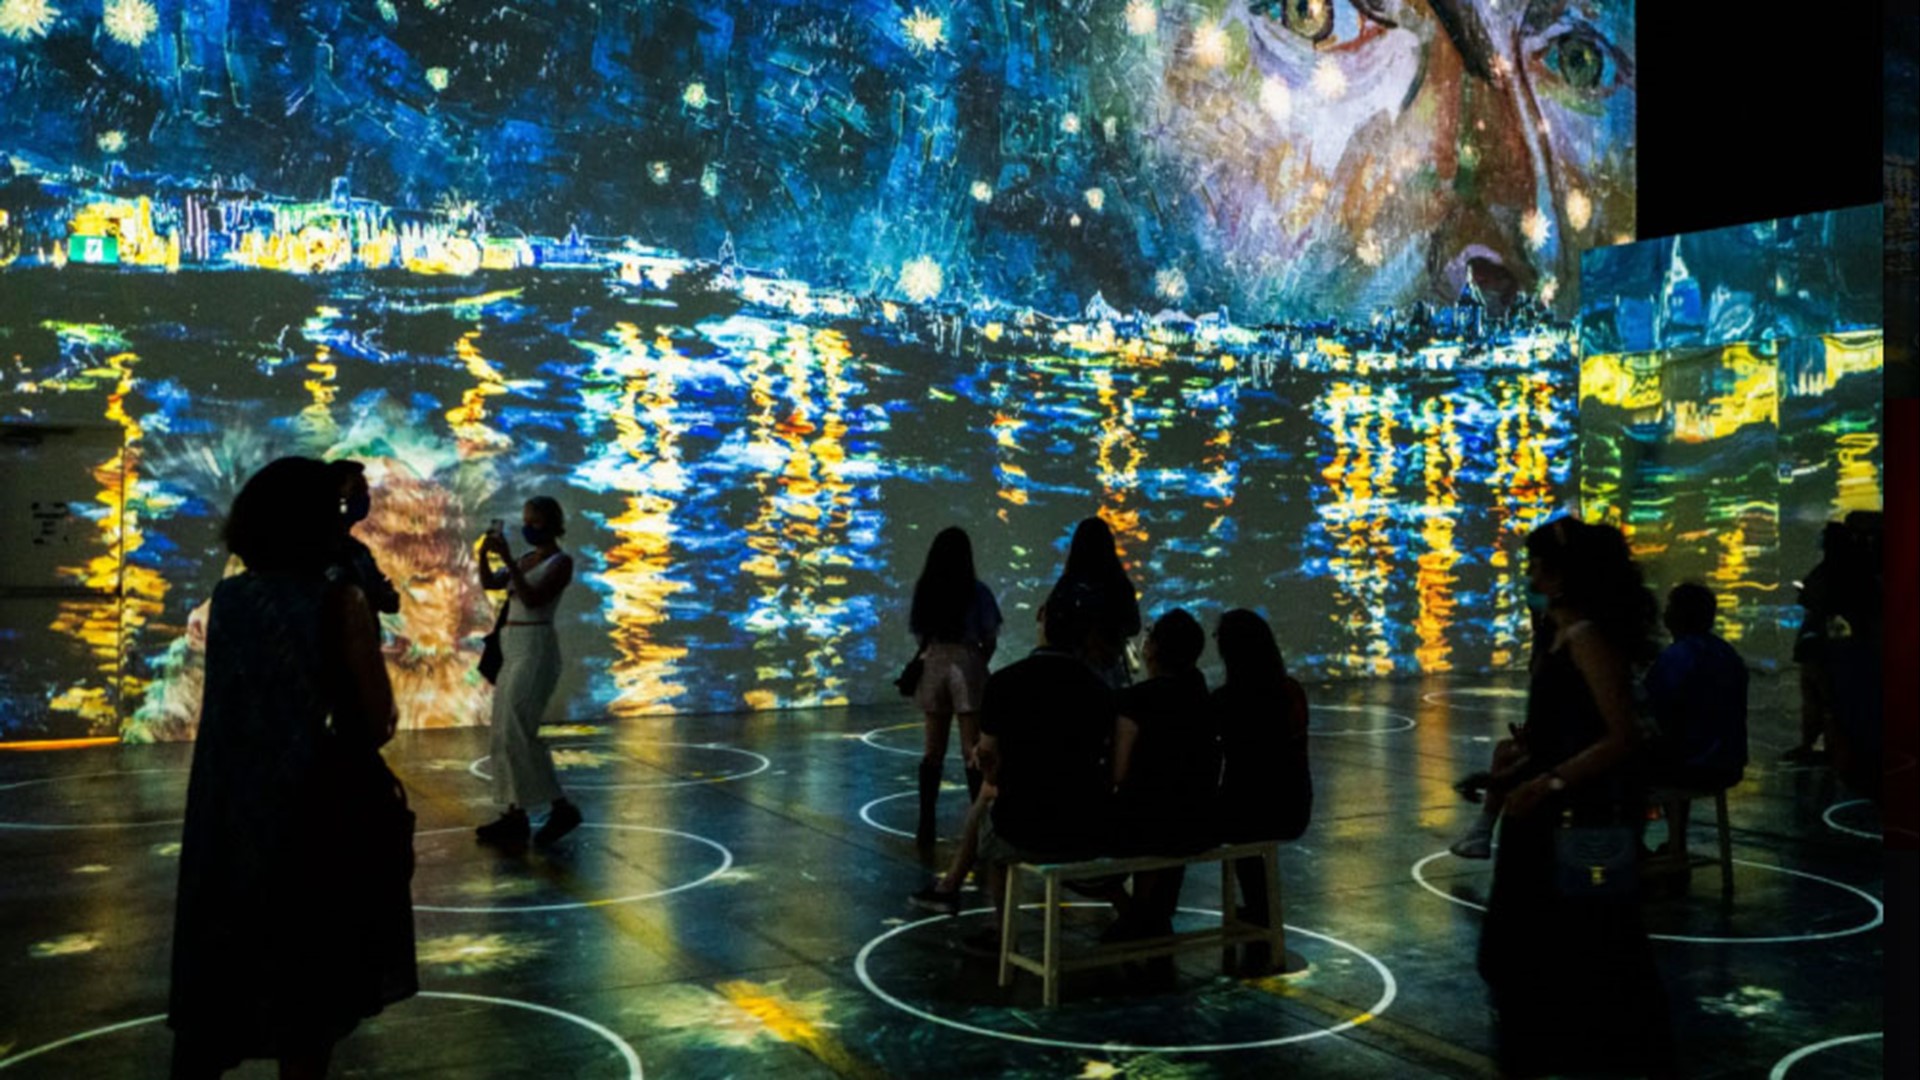 The Immersive Van Gogh exhibit opens Thursday in Camp North End.